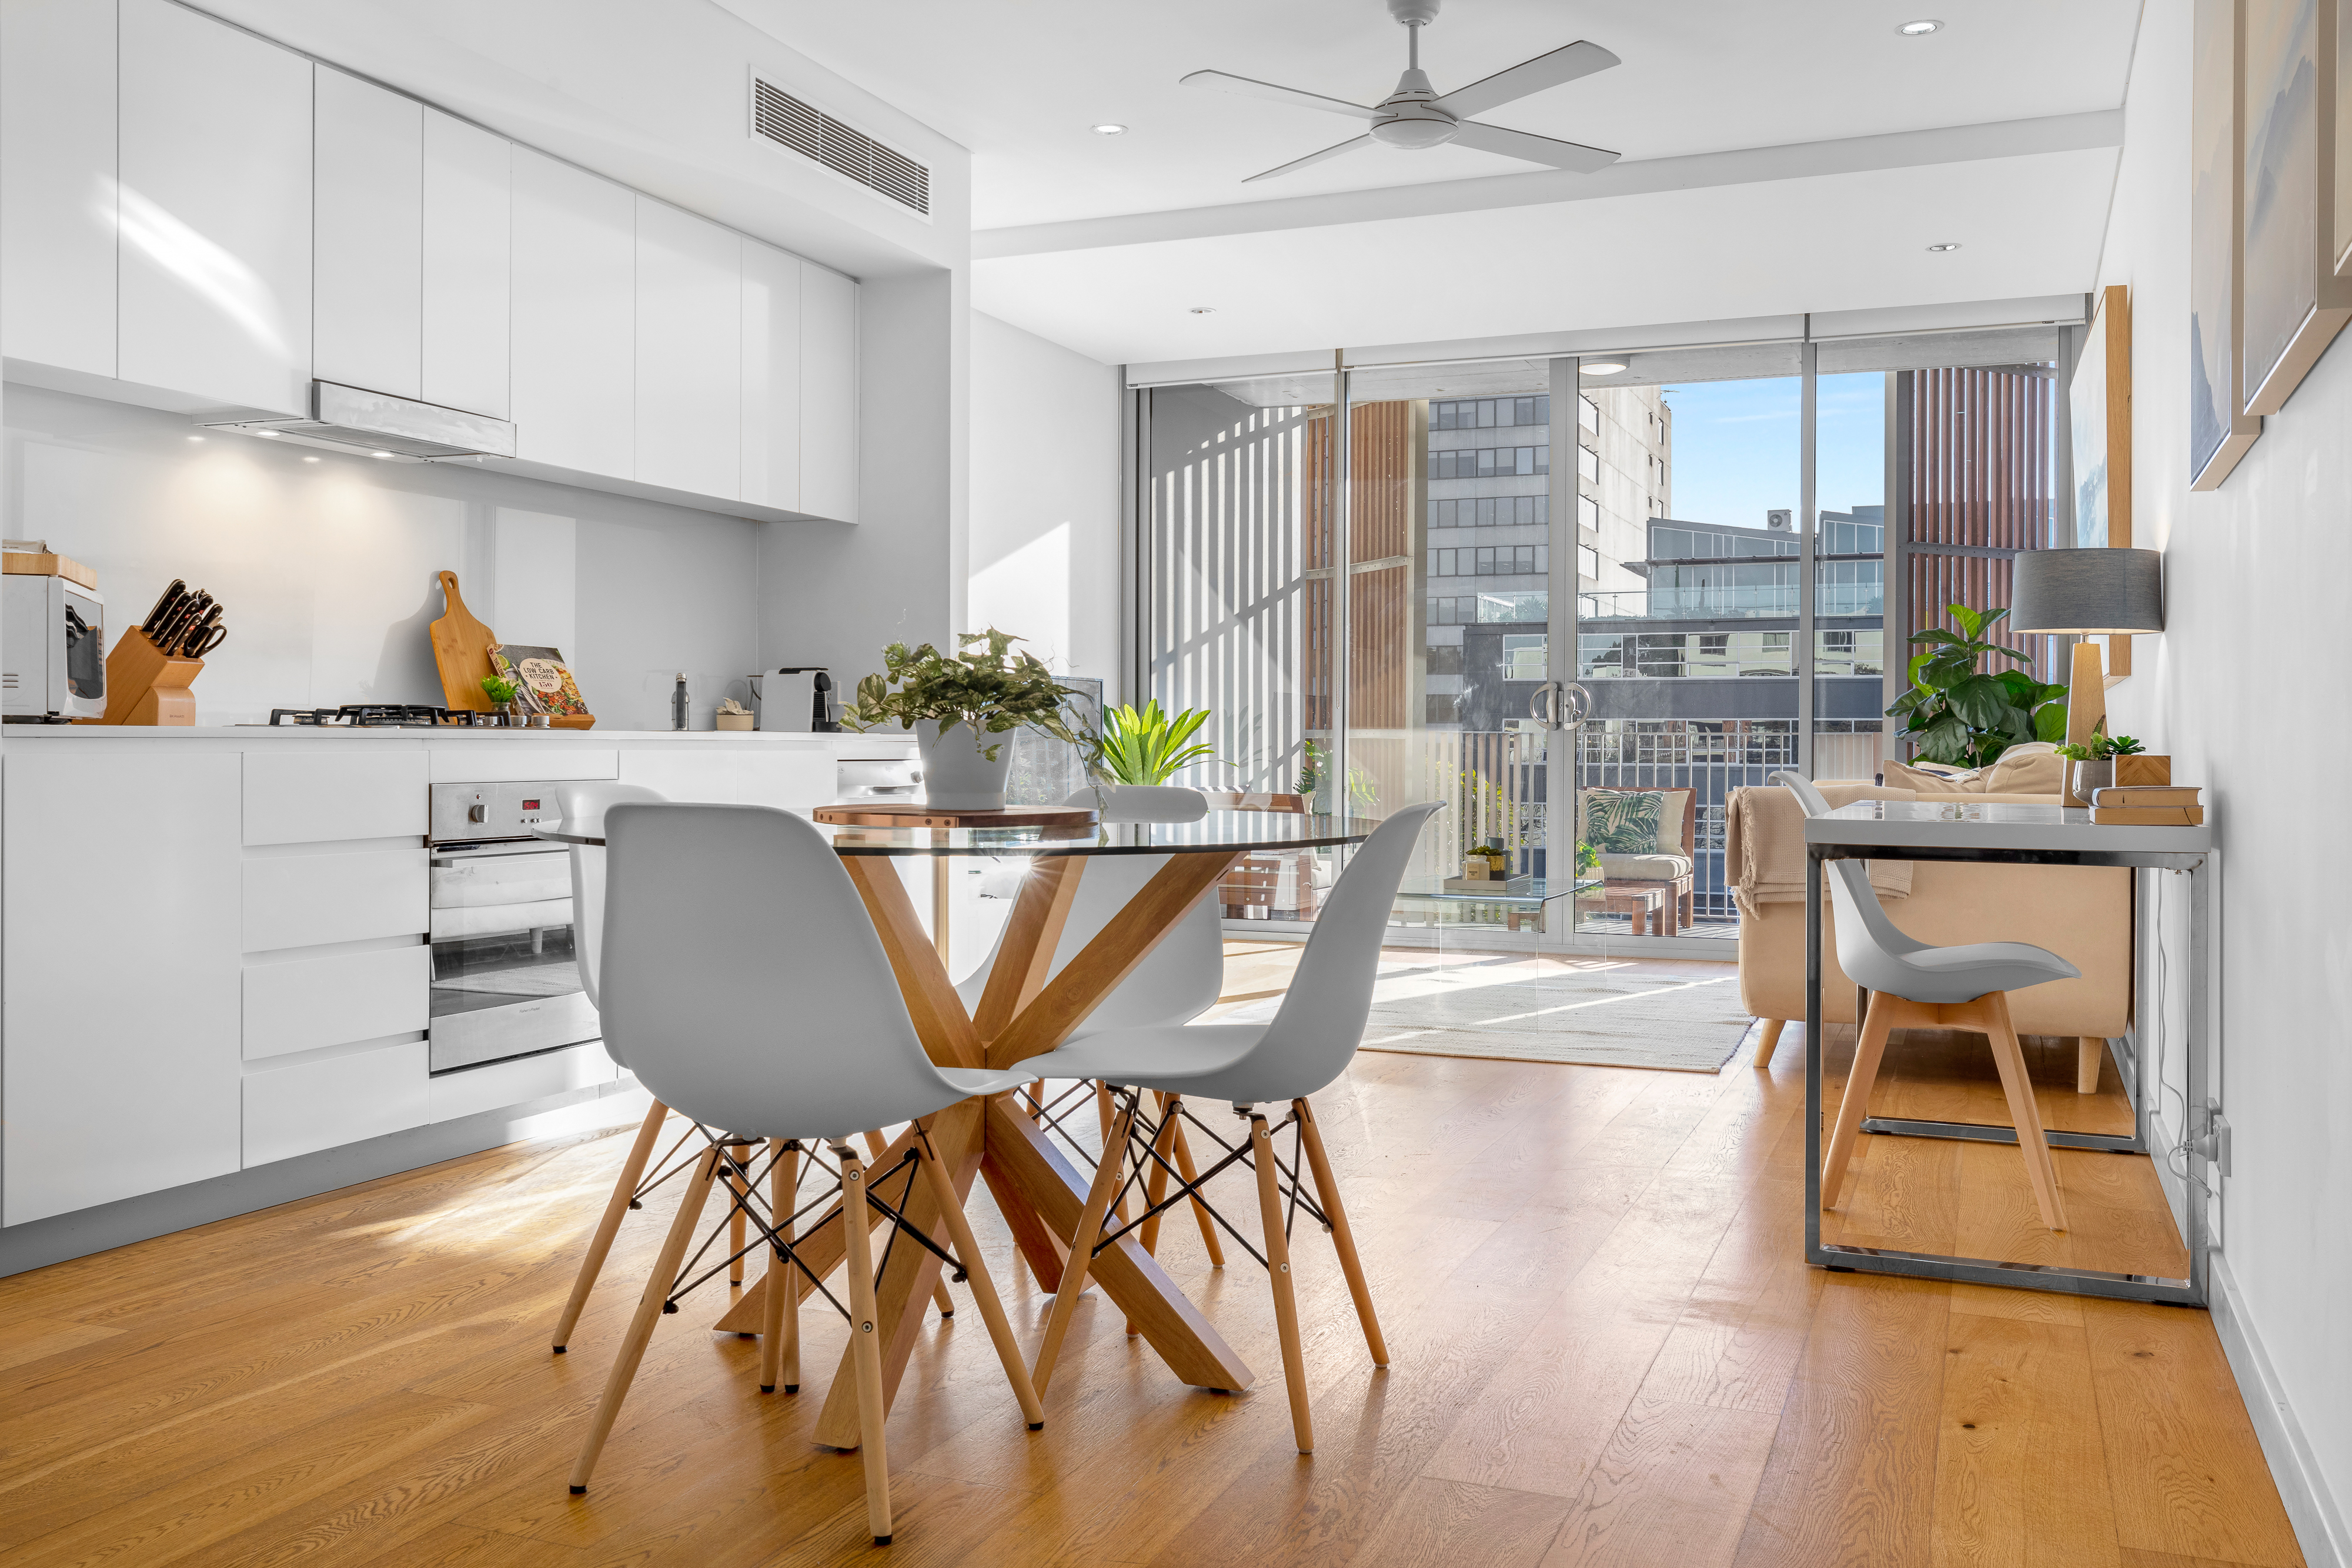 Dining - One Bedroom Apartment - Urban Rest - Waterloo St Apartments - Sydney